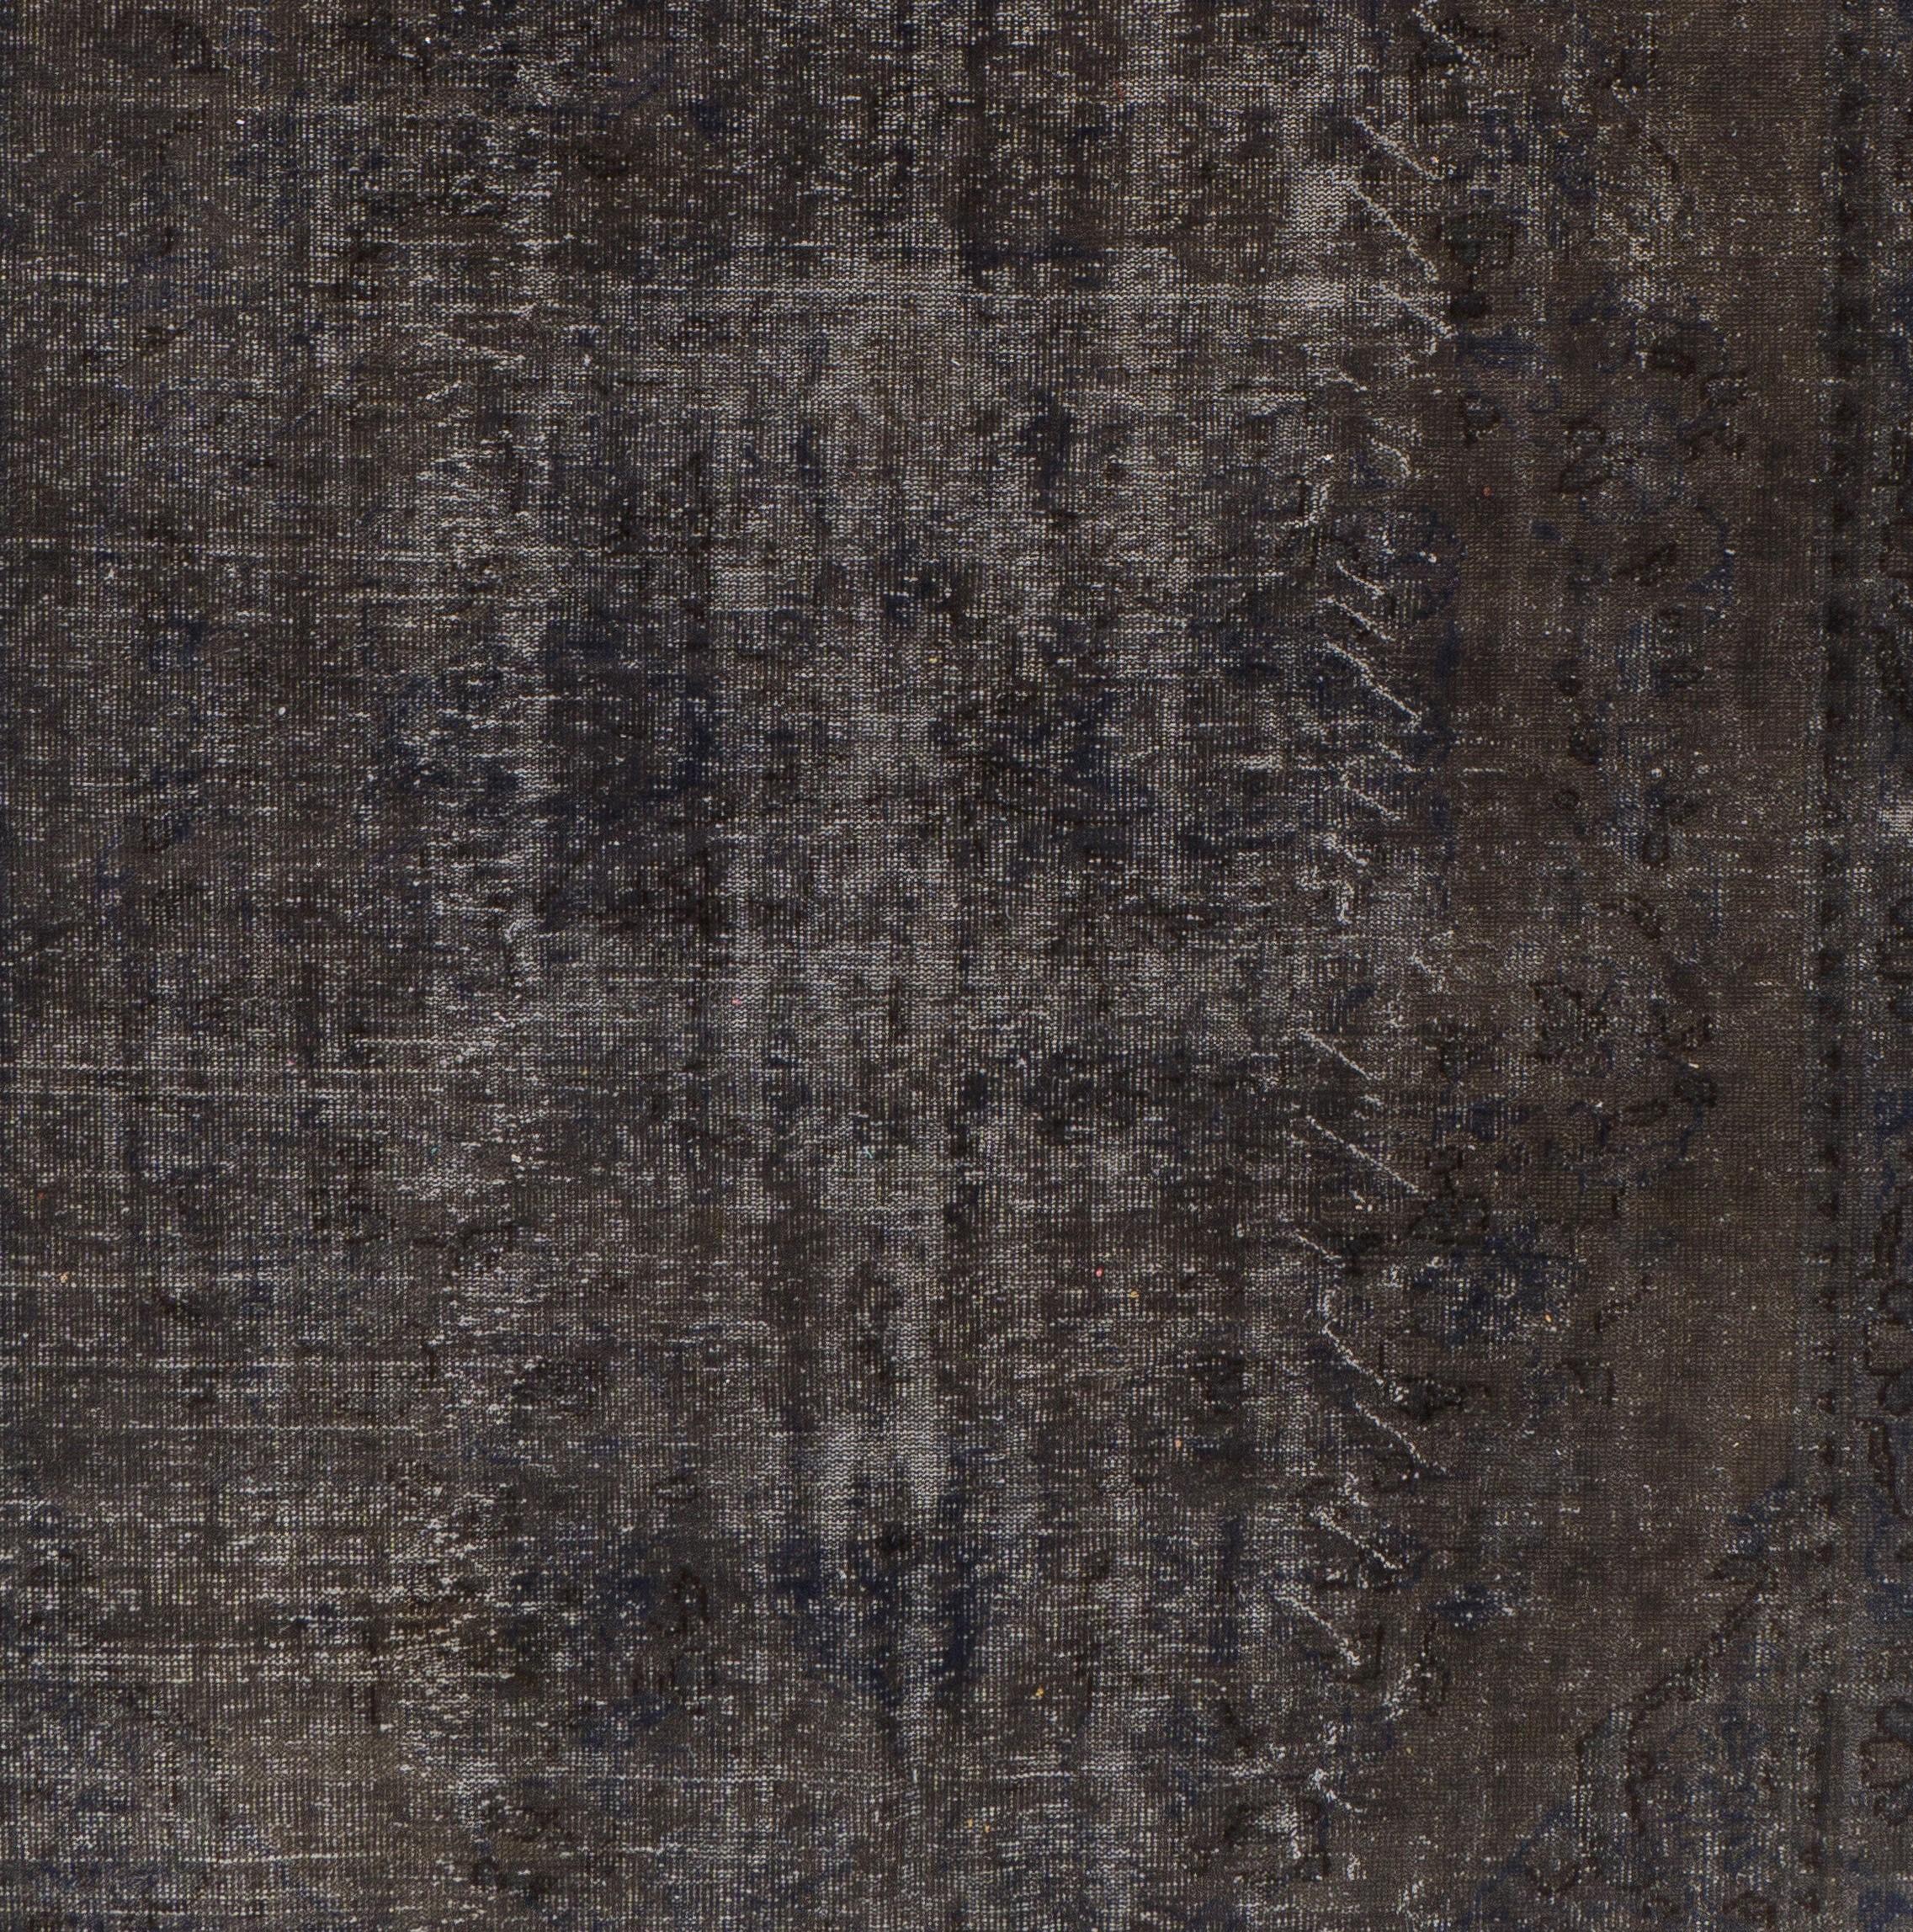 Hand-Knotted 7.6x11.4 Ft Vintage Distressed Handmade Turkish Large Rug in Taupe & Black Color For Sale